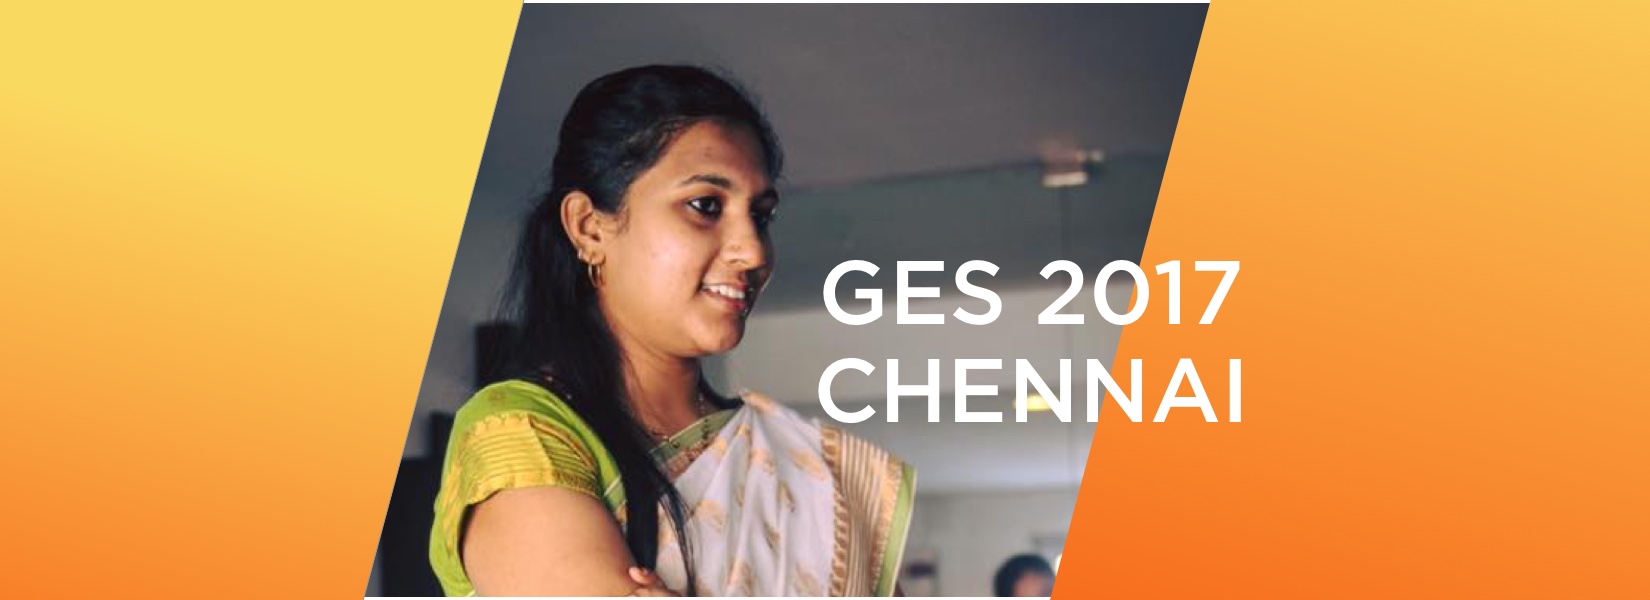 Swaathi Kakarla to be on the panel at GES 2017 in Chennai